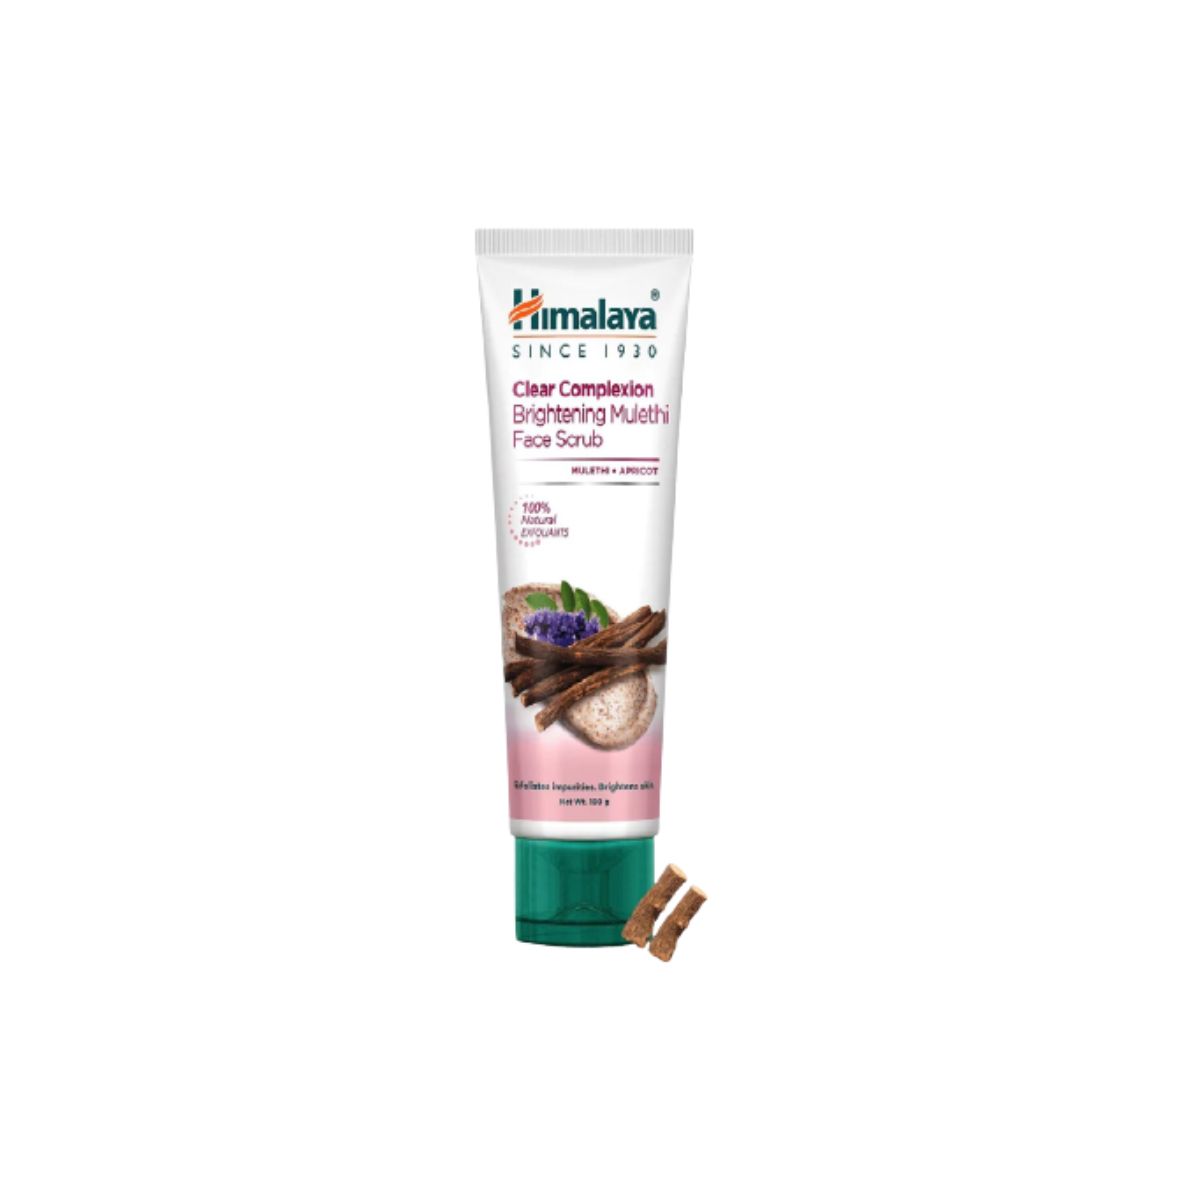 Himalaya Face Scrub - Clear Complexion Brightening Mulethi - Apricot - 100% Natural Exfoliants - Since 1930 - 100g